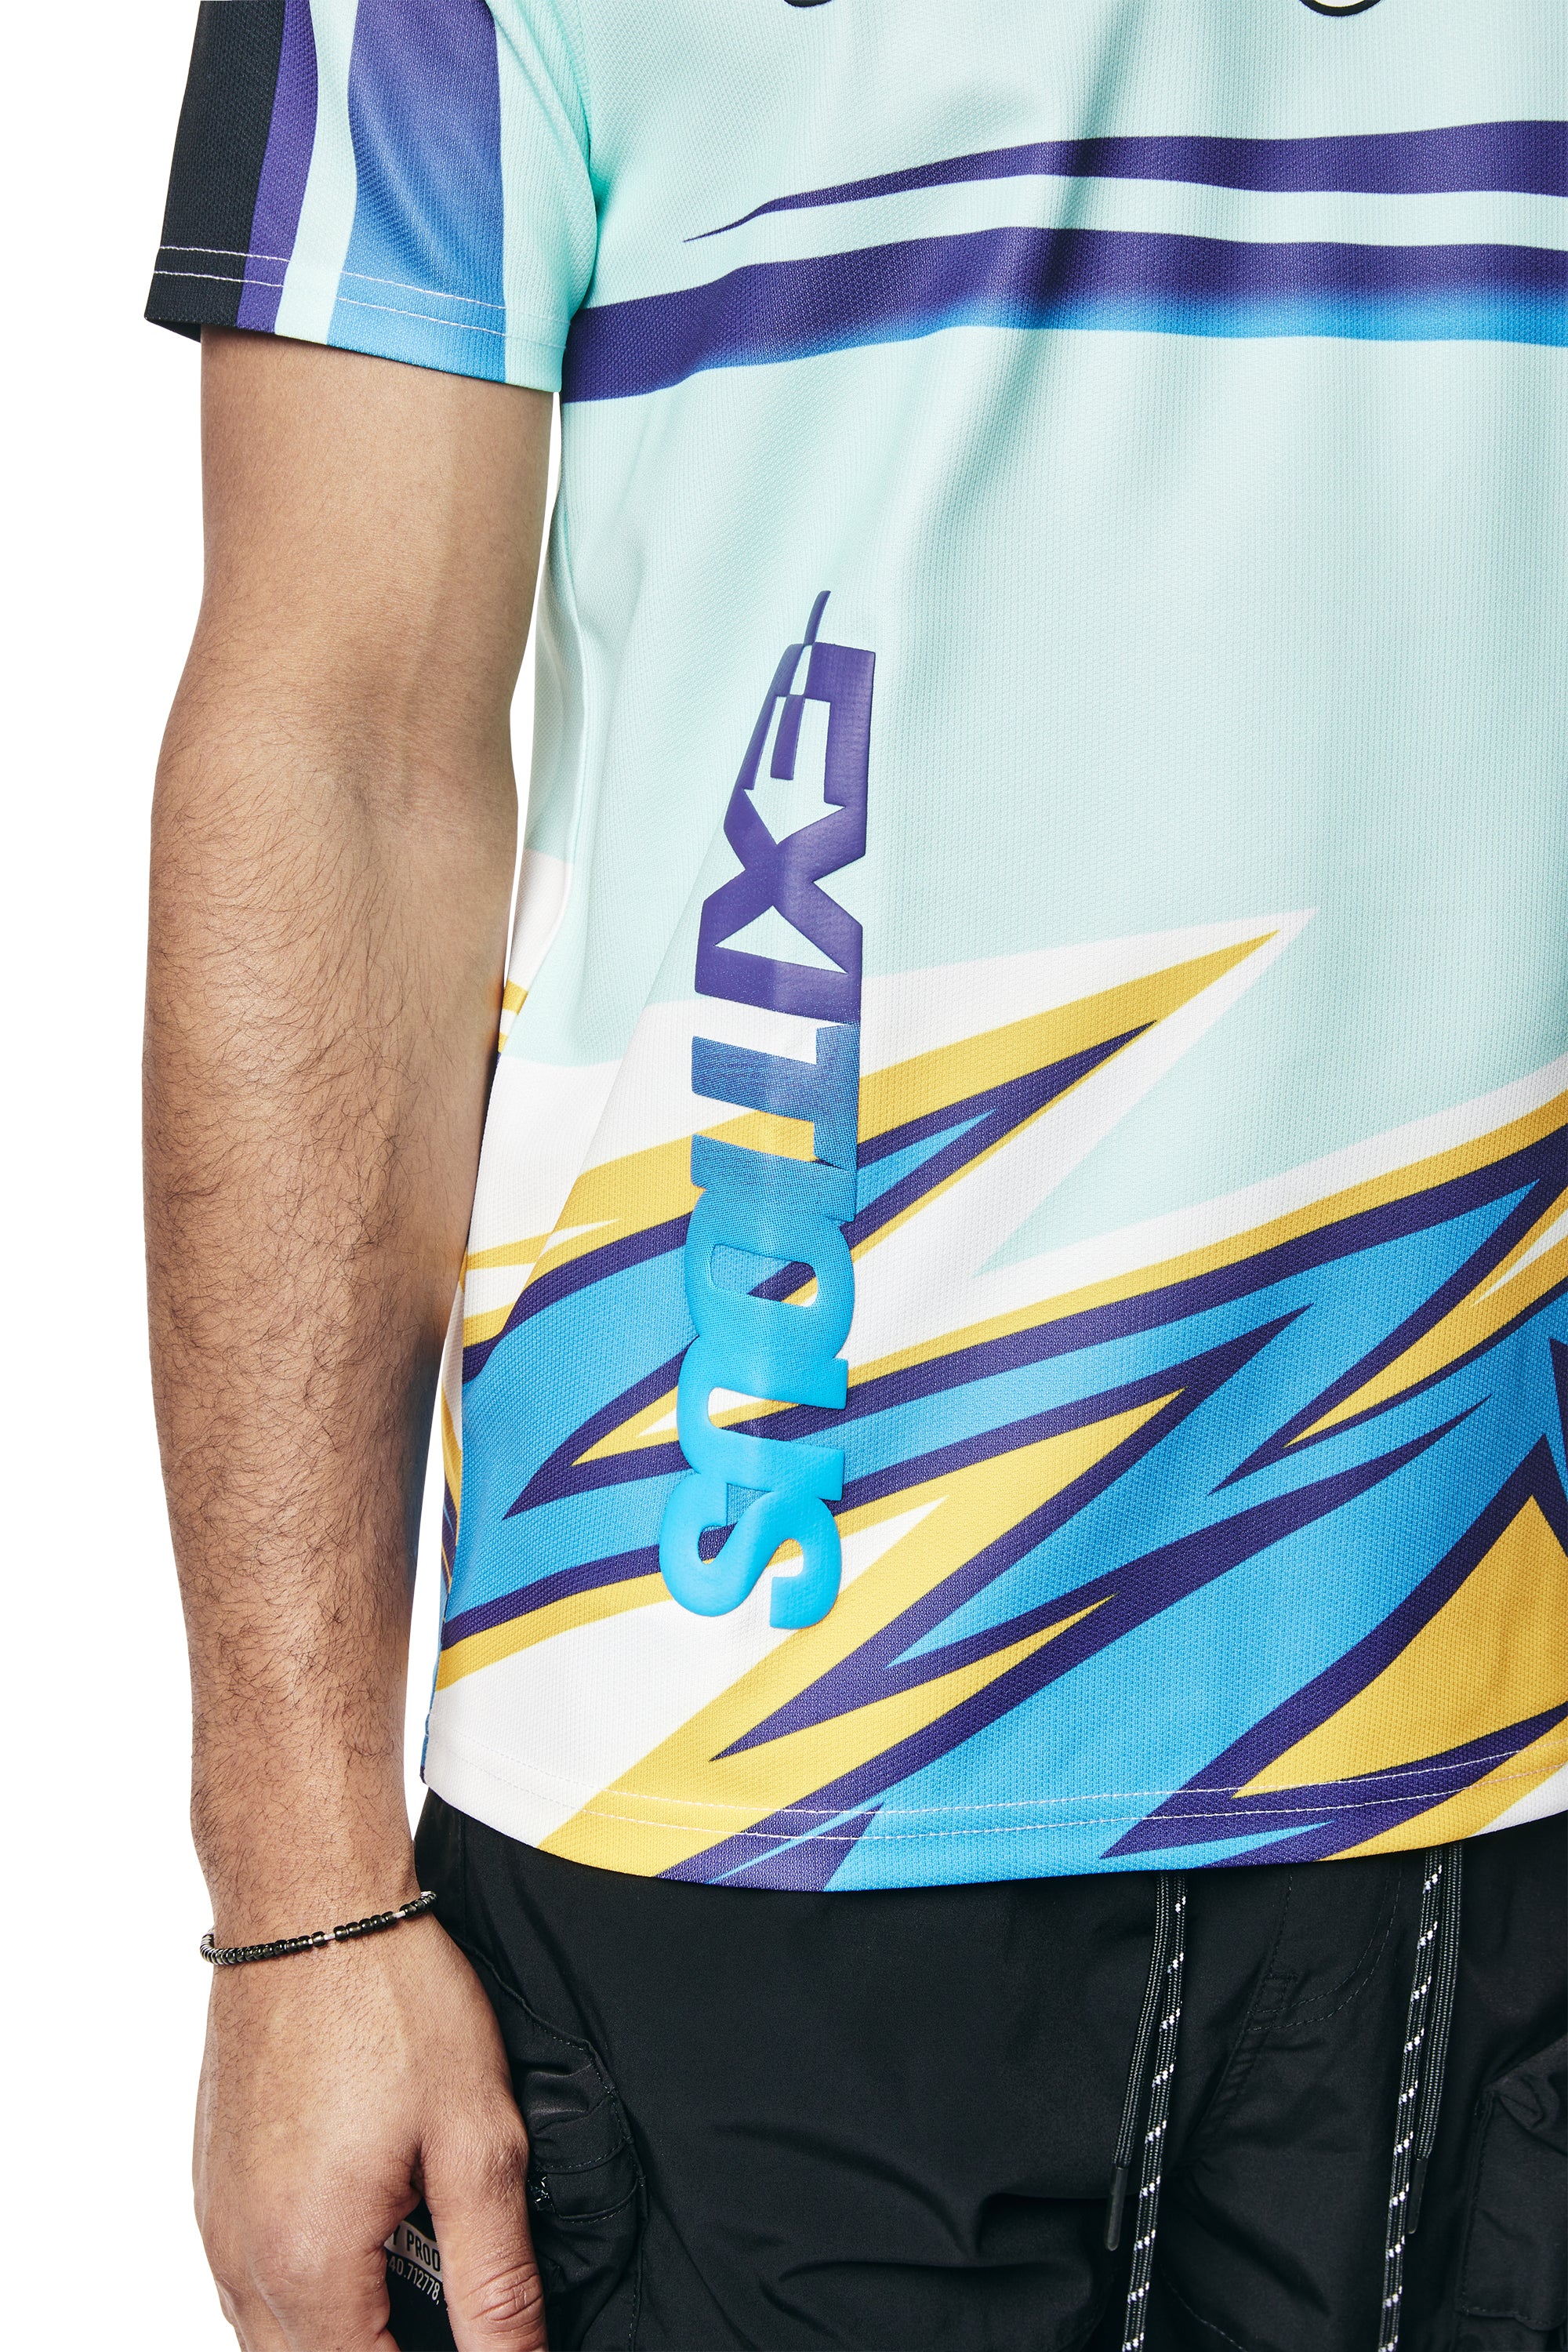 Racing Sublimation SS T-Shirt - Blue